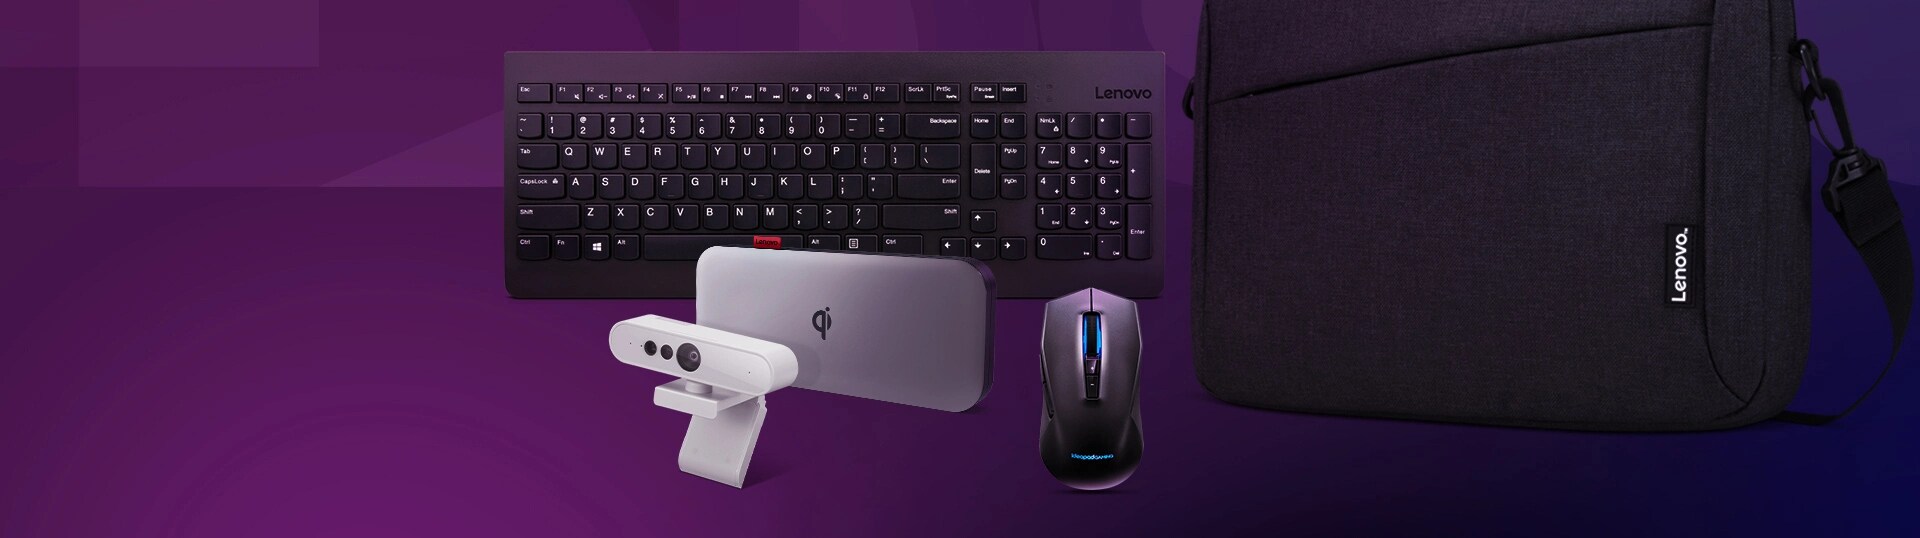 A Lenovo 510 FHD Webcam, a Lenovo T210 12 inch Laptop Topload, a Lenovo 510 Wireless Combo Keyboard, a Lenovo GO Wireless Power Bank 10000 mAh and an Lenovo IdeaPad Gaming M100 RGB Mouse are featured on a background.